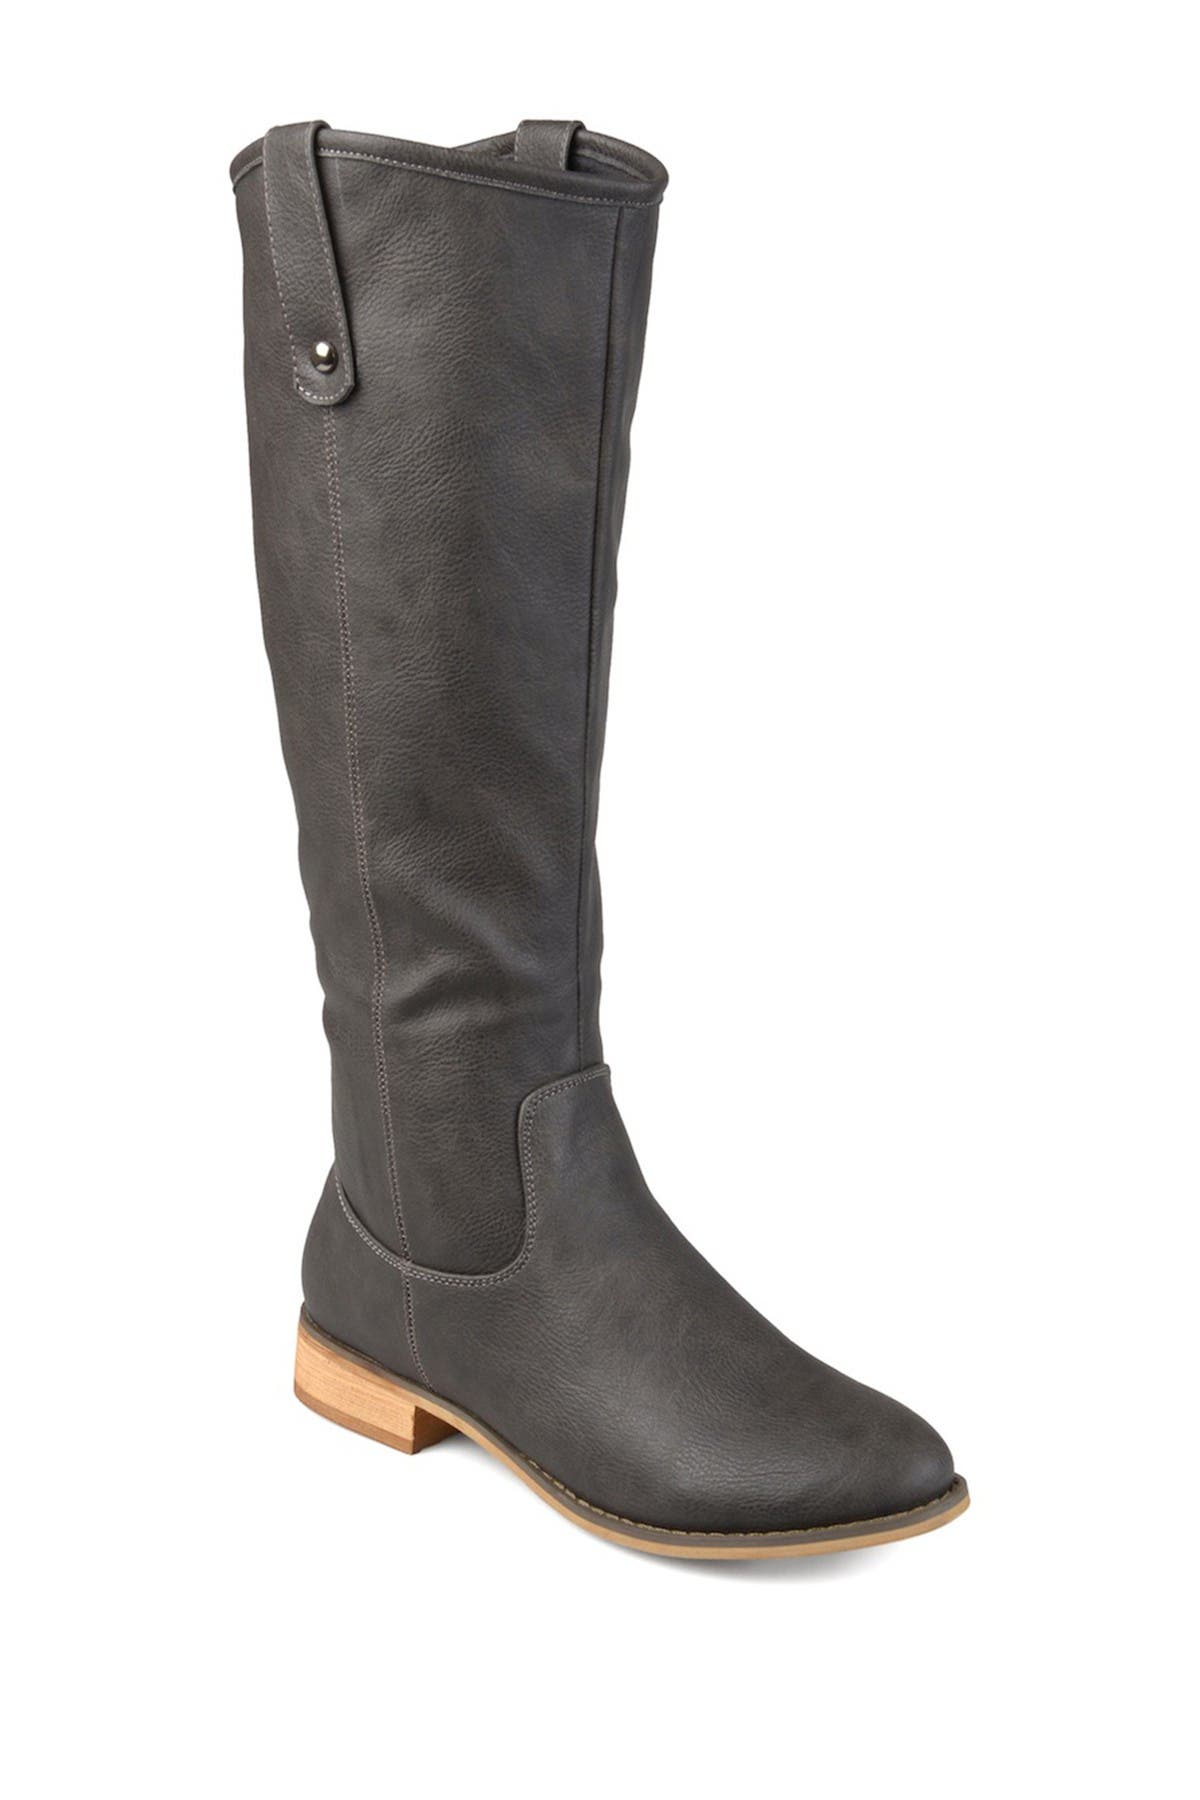 wide mid calf boots